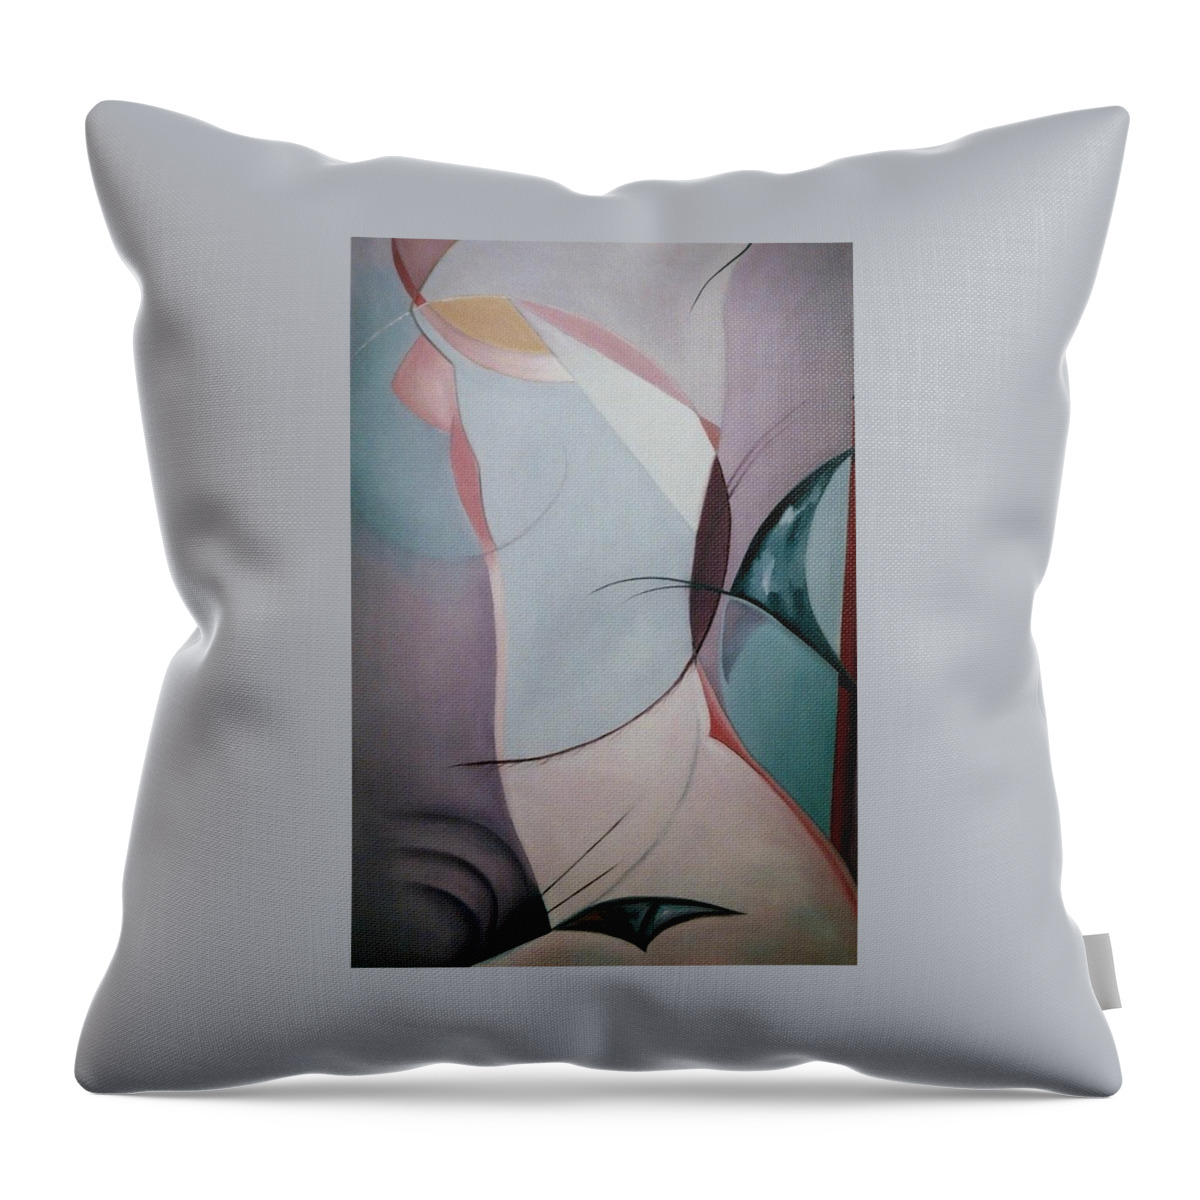 Female Throw Pillow featuring the painting From the Time Before Time by Jodie Marie Anne Richardson Traugott     aka jm-ART